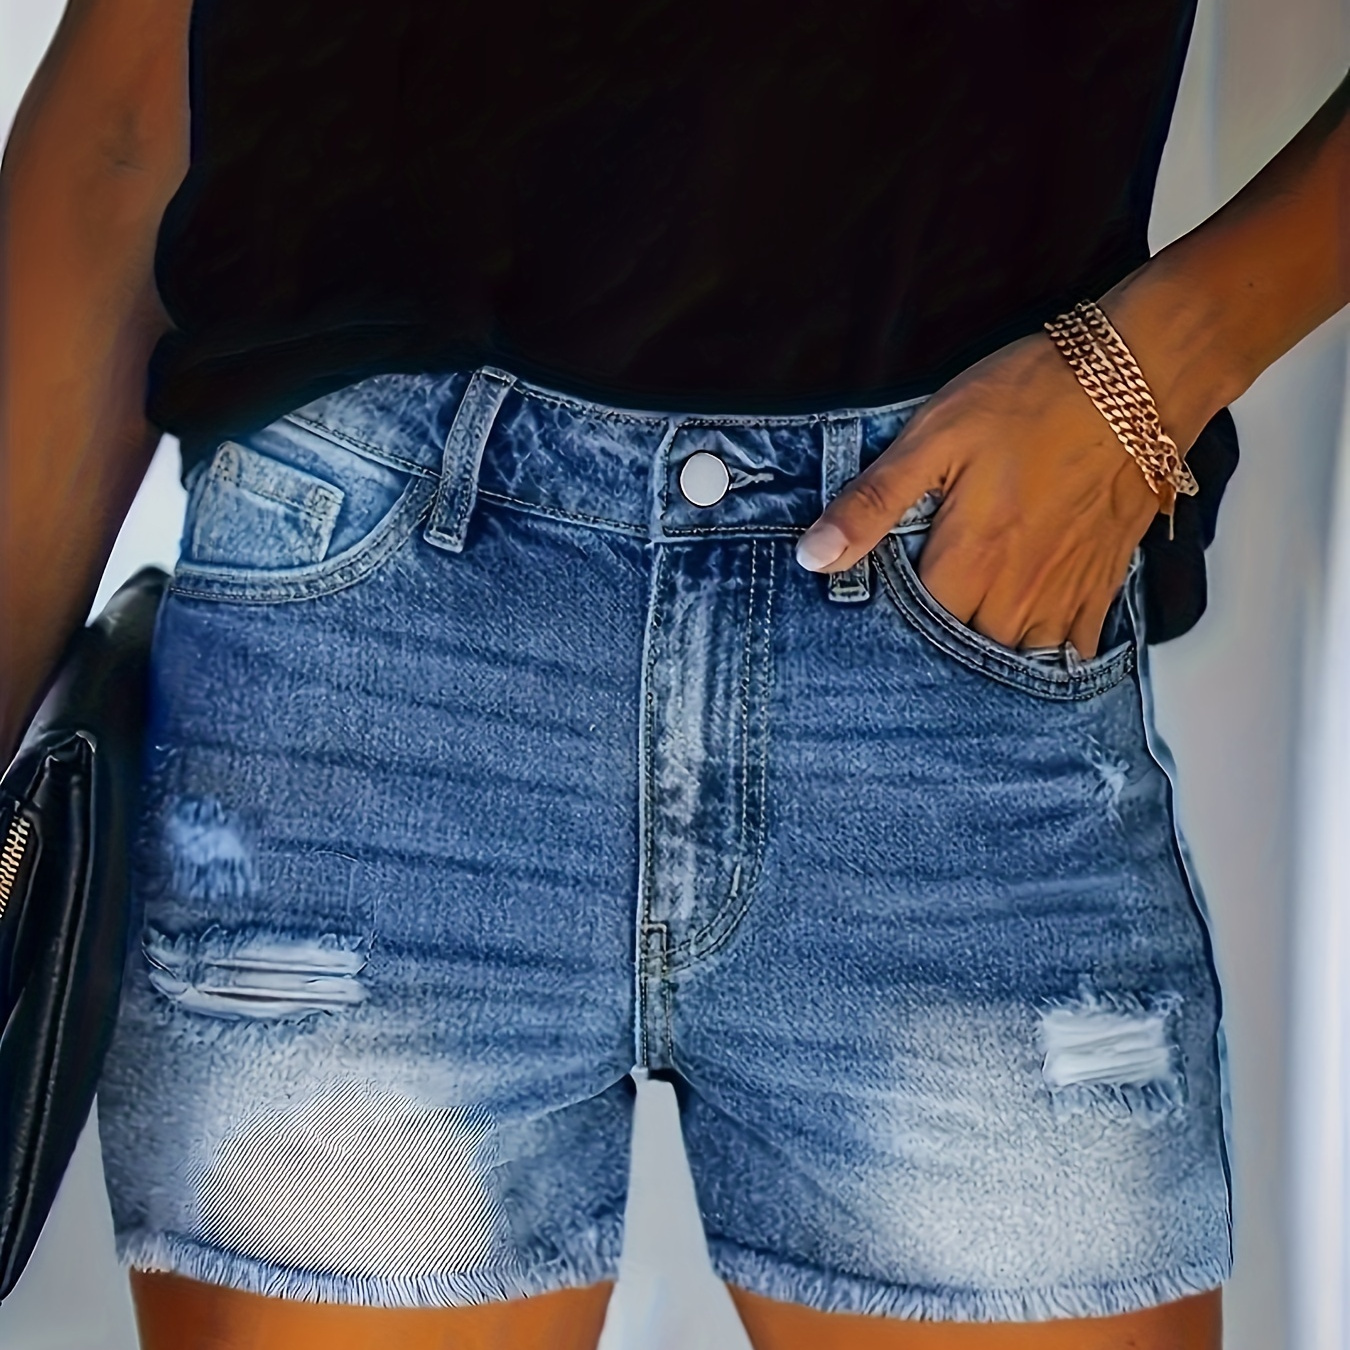 

Women's Plus Size Distressed Denim Shorts, High-waisted, Frayed Hem, Vintage Style Jean Shorts For Casual Summer Wear